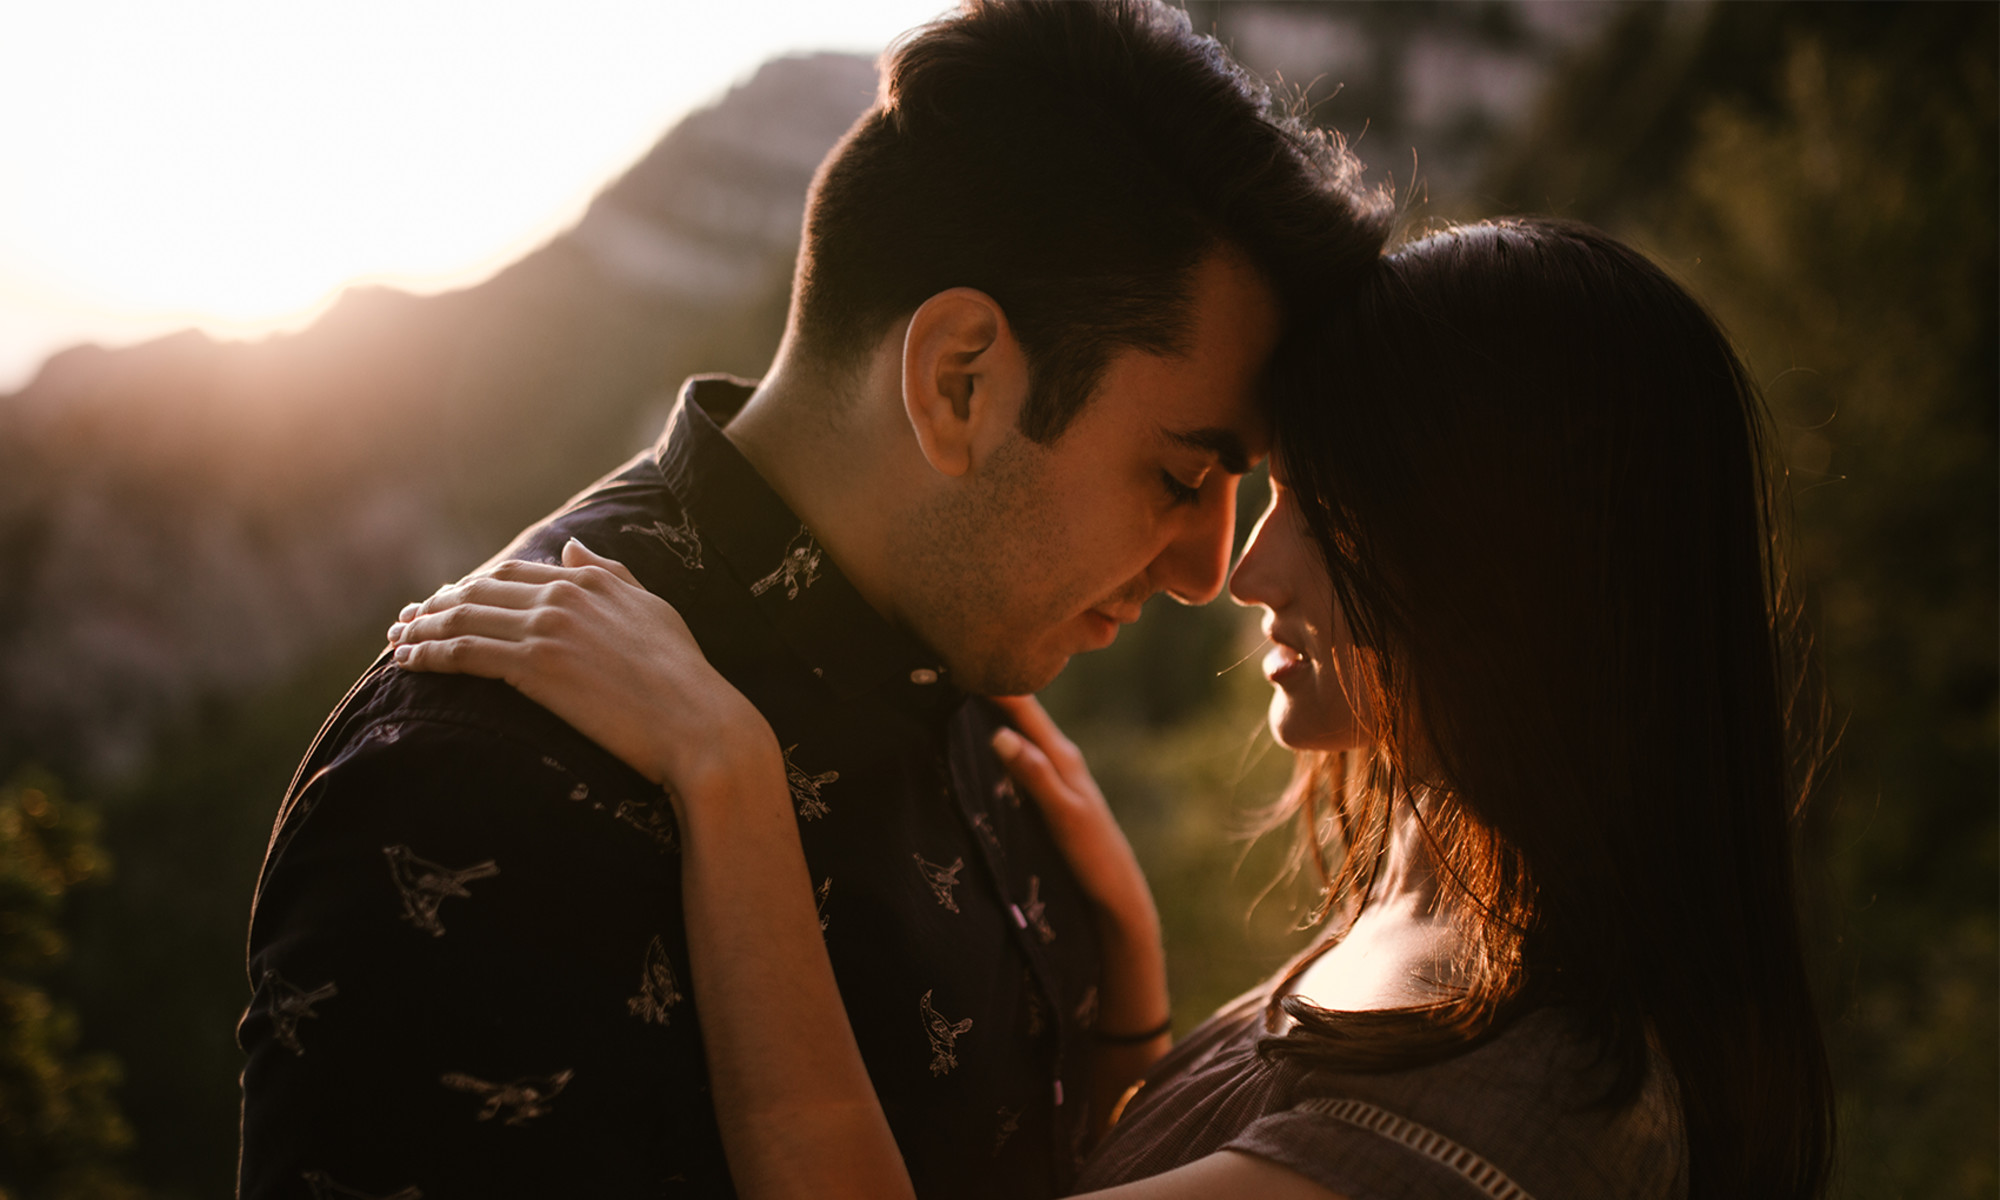 How To Kiss 26 Tips To Be A Better Kisser, From Experts mindbodygreen pic image